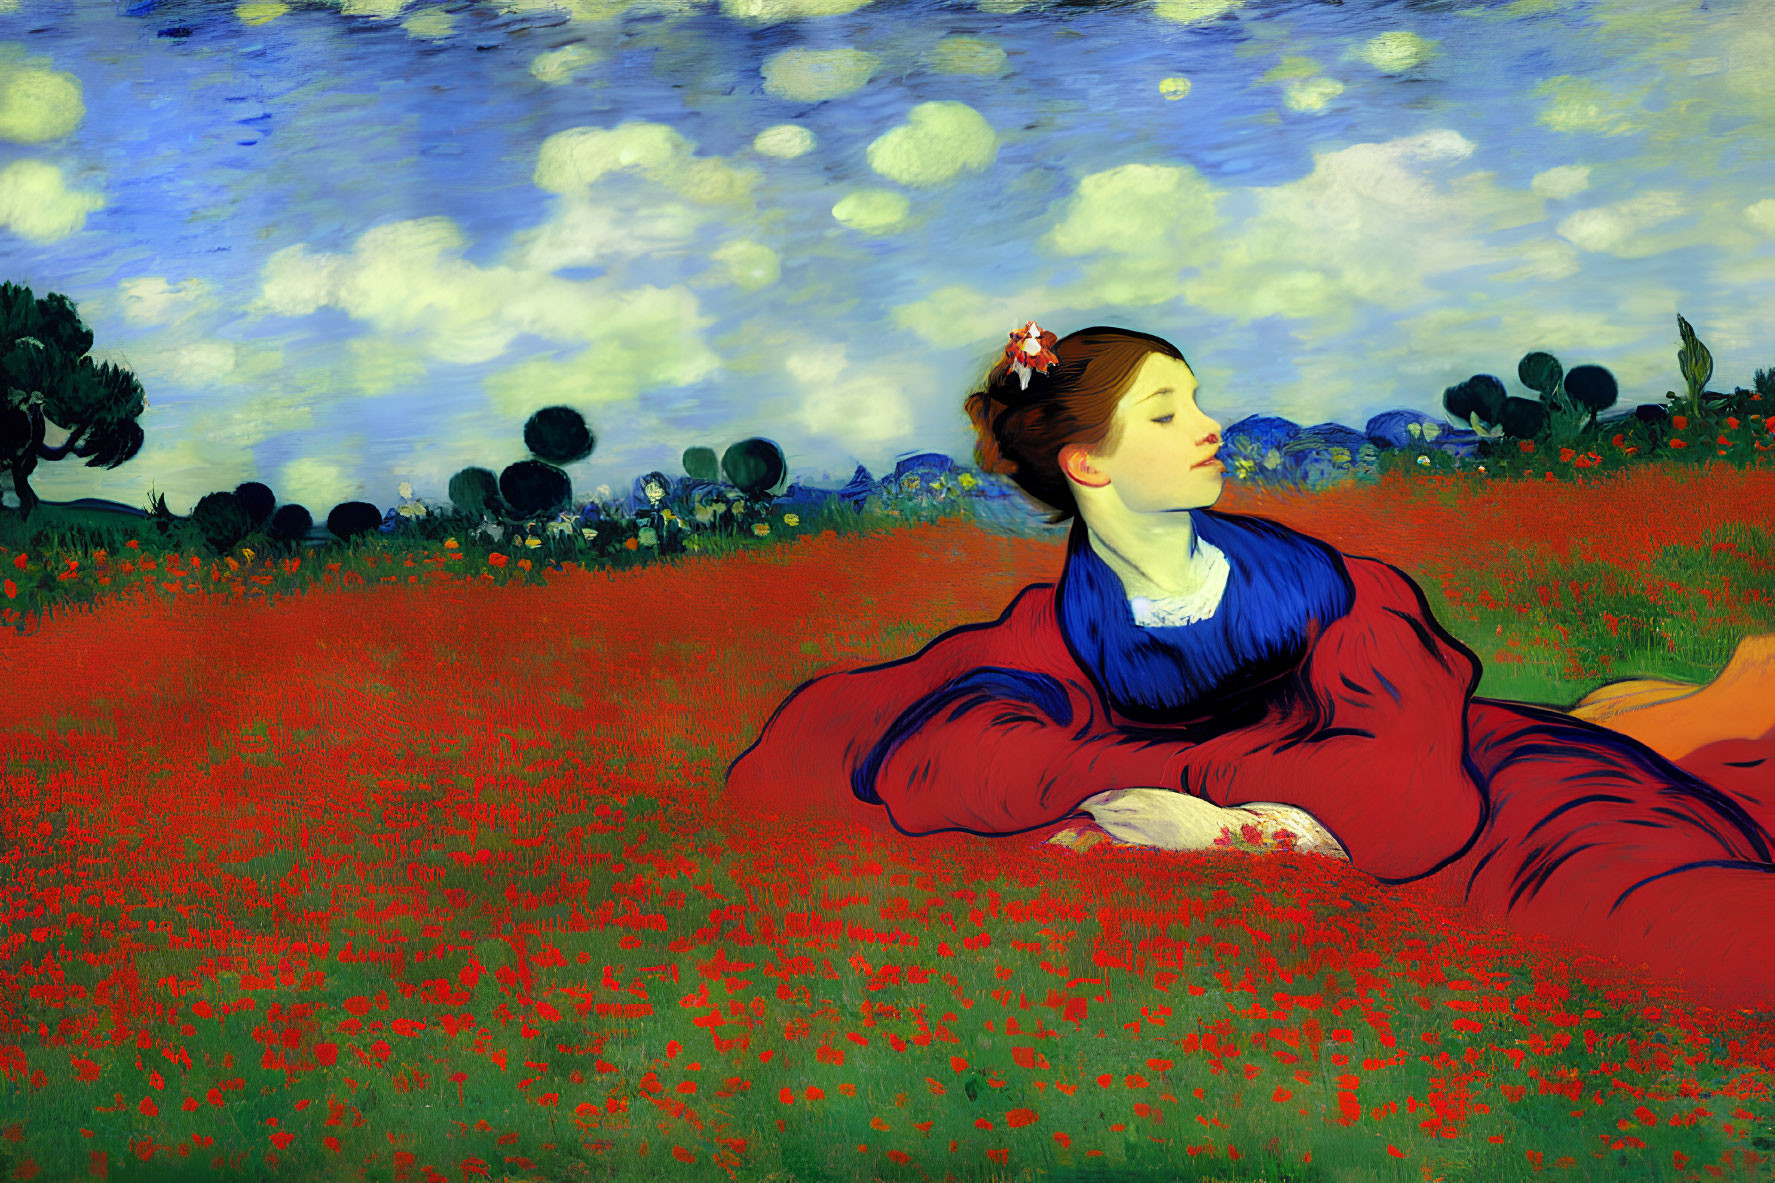 Vibrant red dress woman reclining in field of red flowers